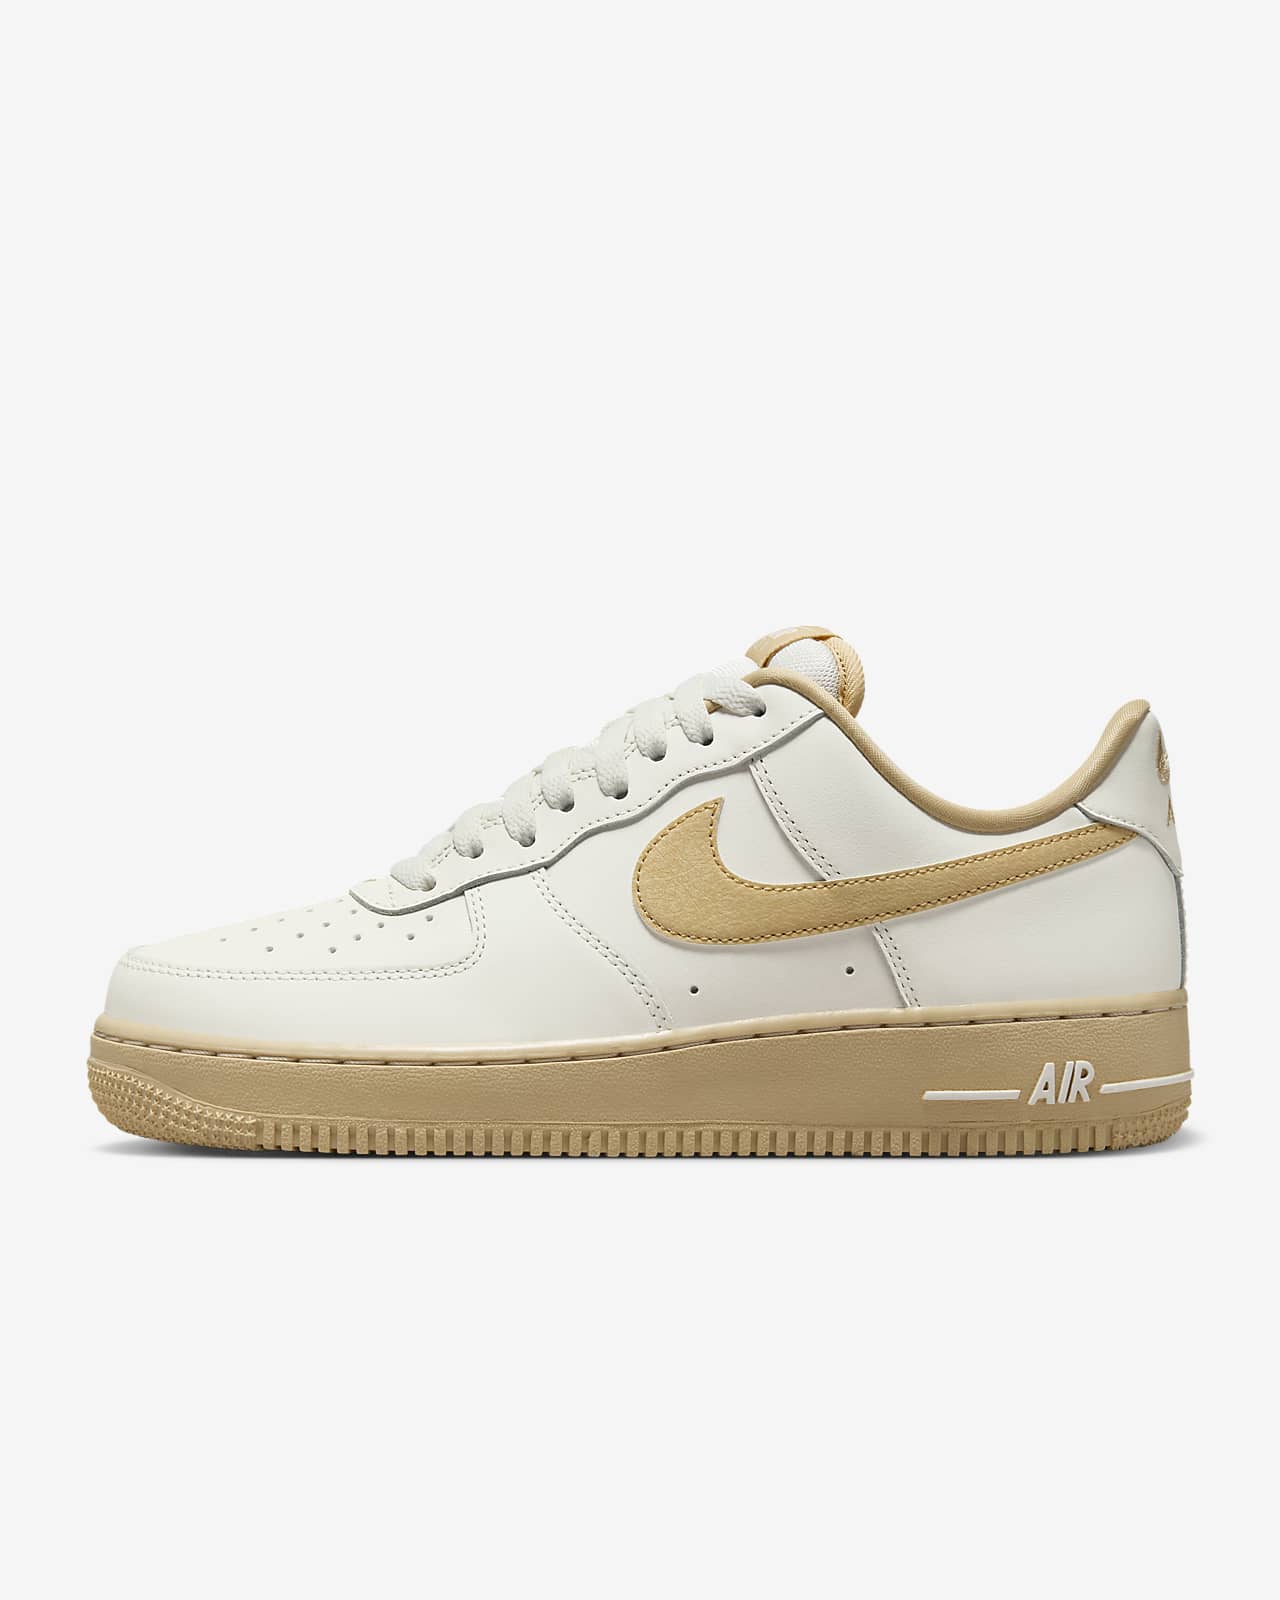 Nike Air Force 1 ’07 Women's Shoes